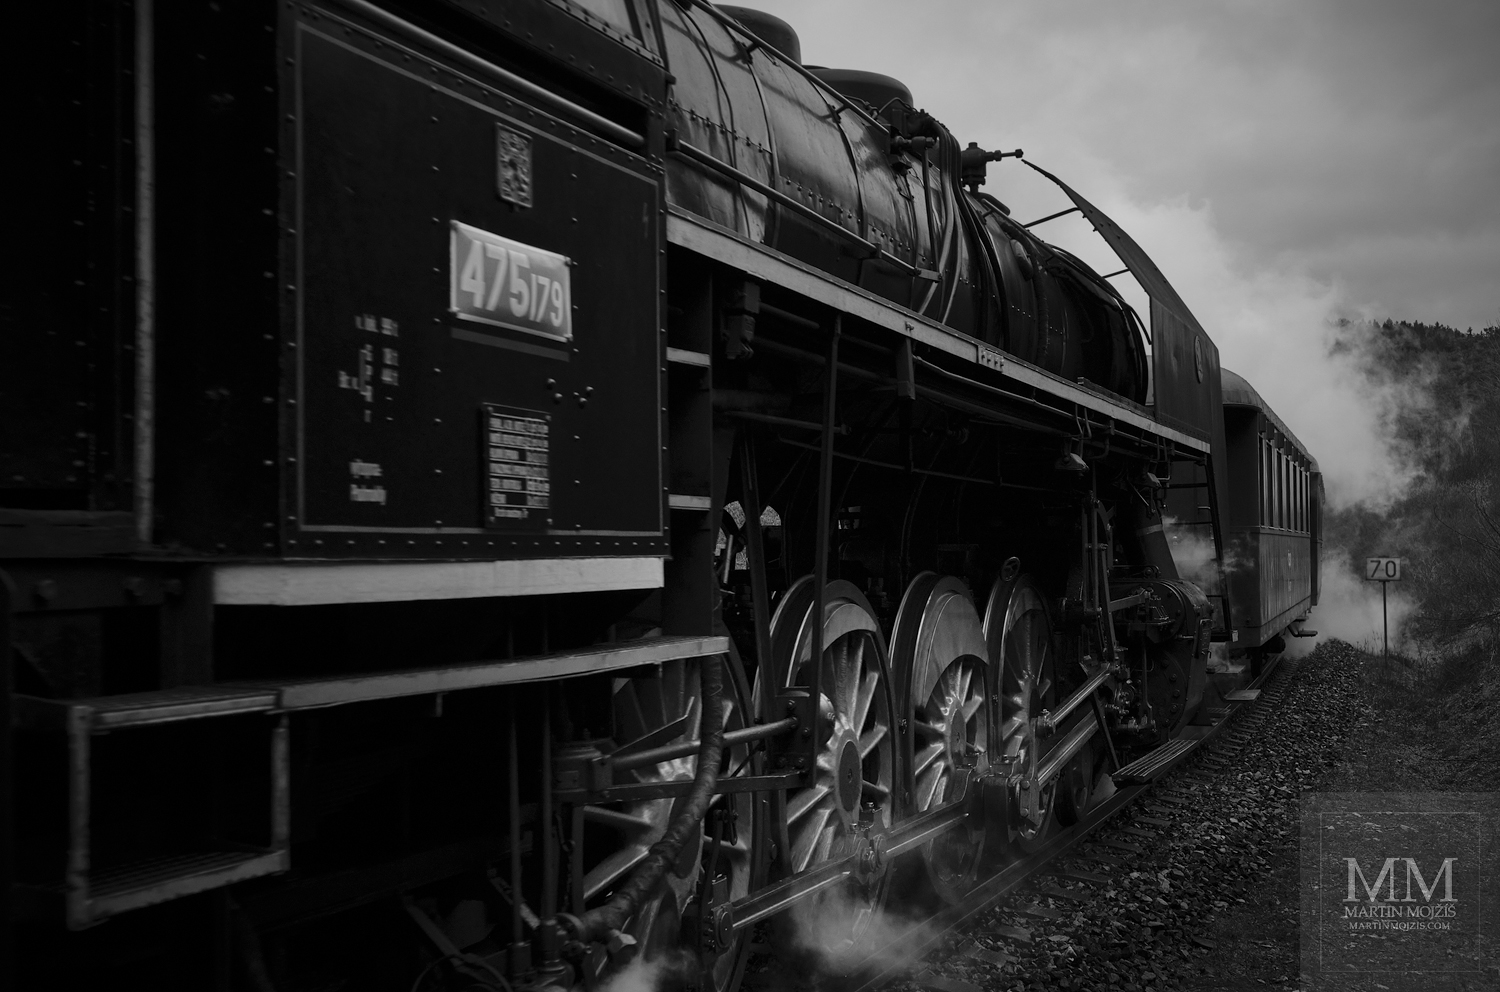 Fine Art large format black and white photograph of the steam locomotive. Martin Mojzis.